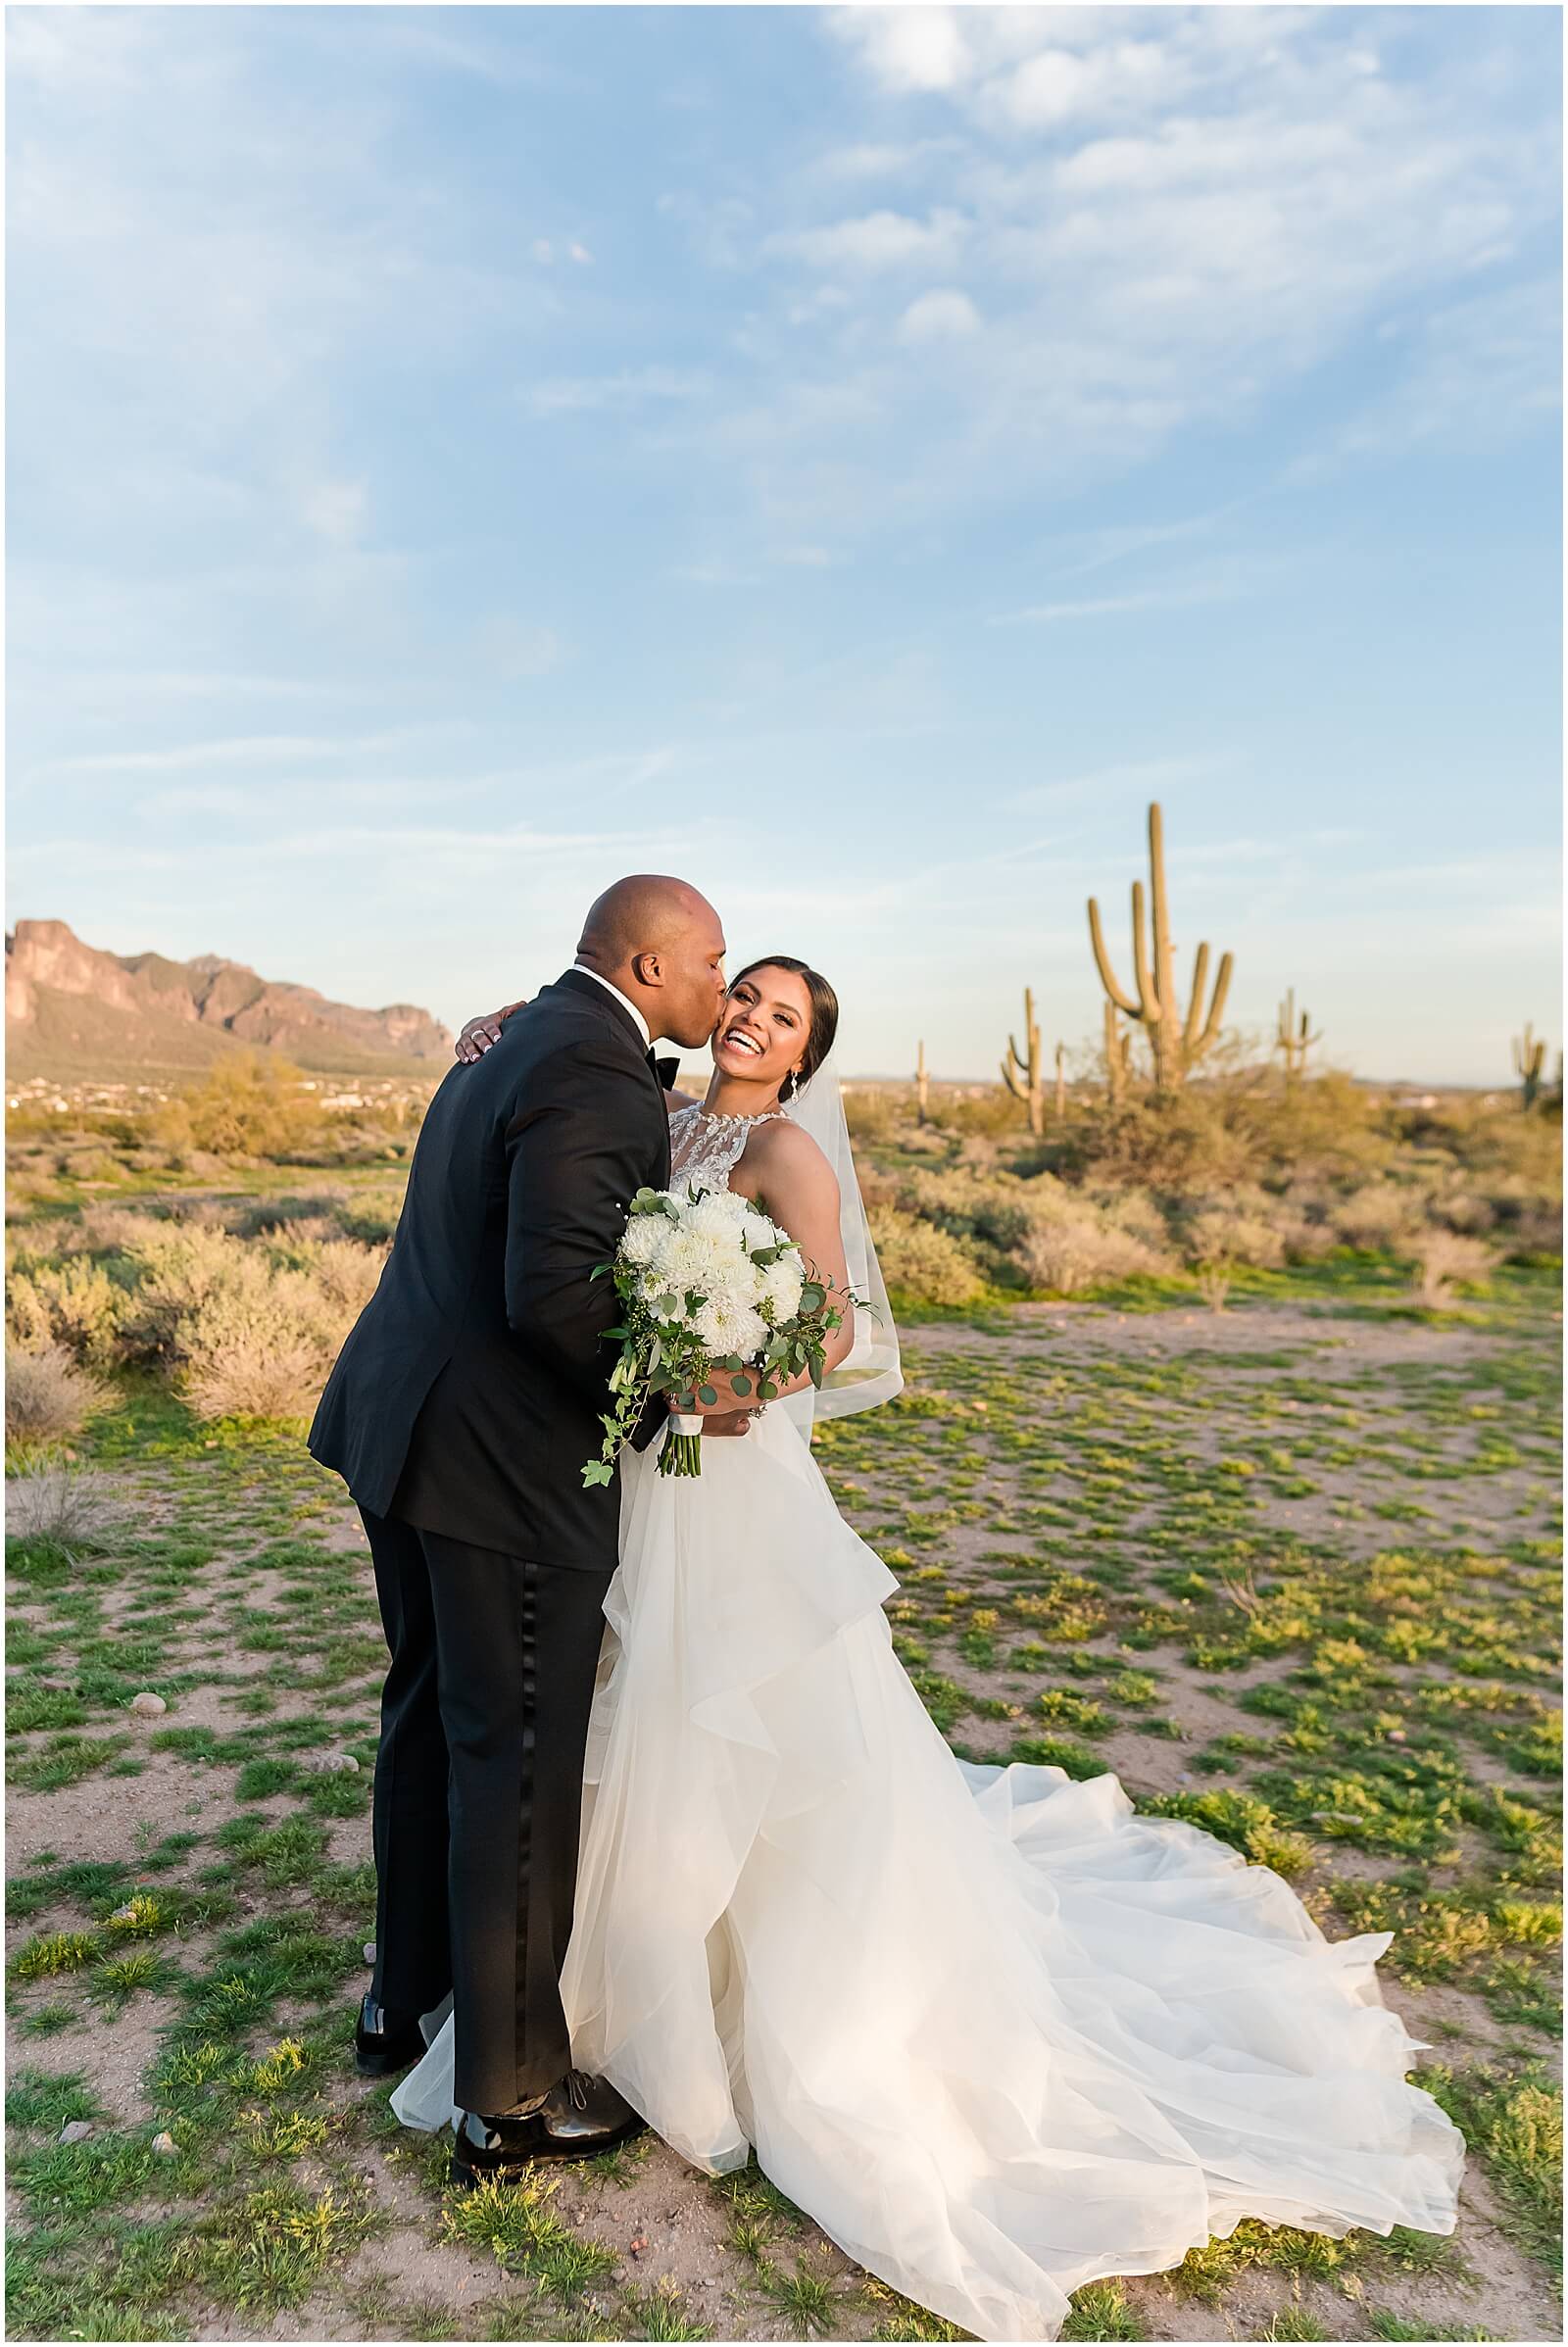 Beautiful wedding day pictures, wedding pictures in the desert,